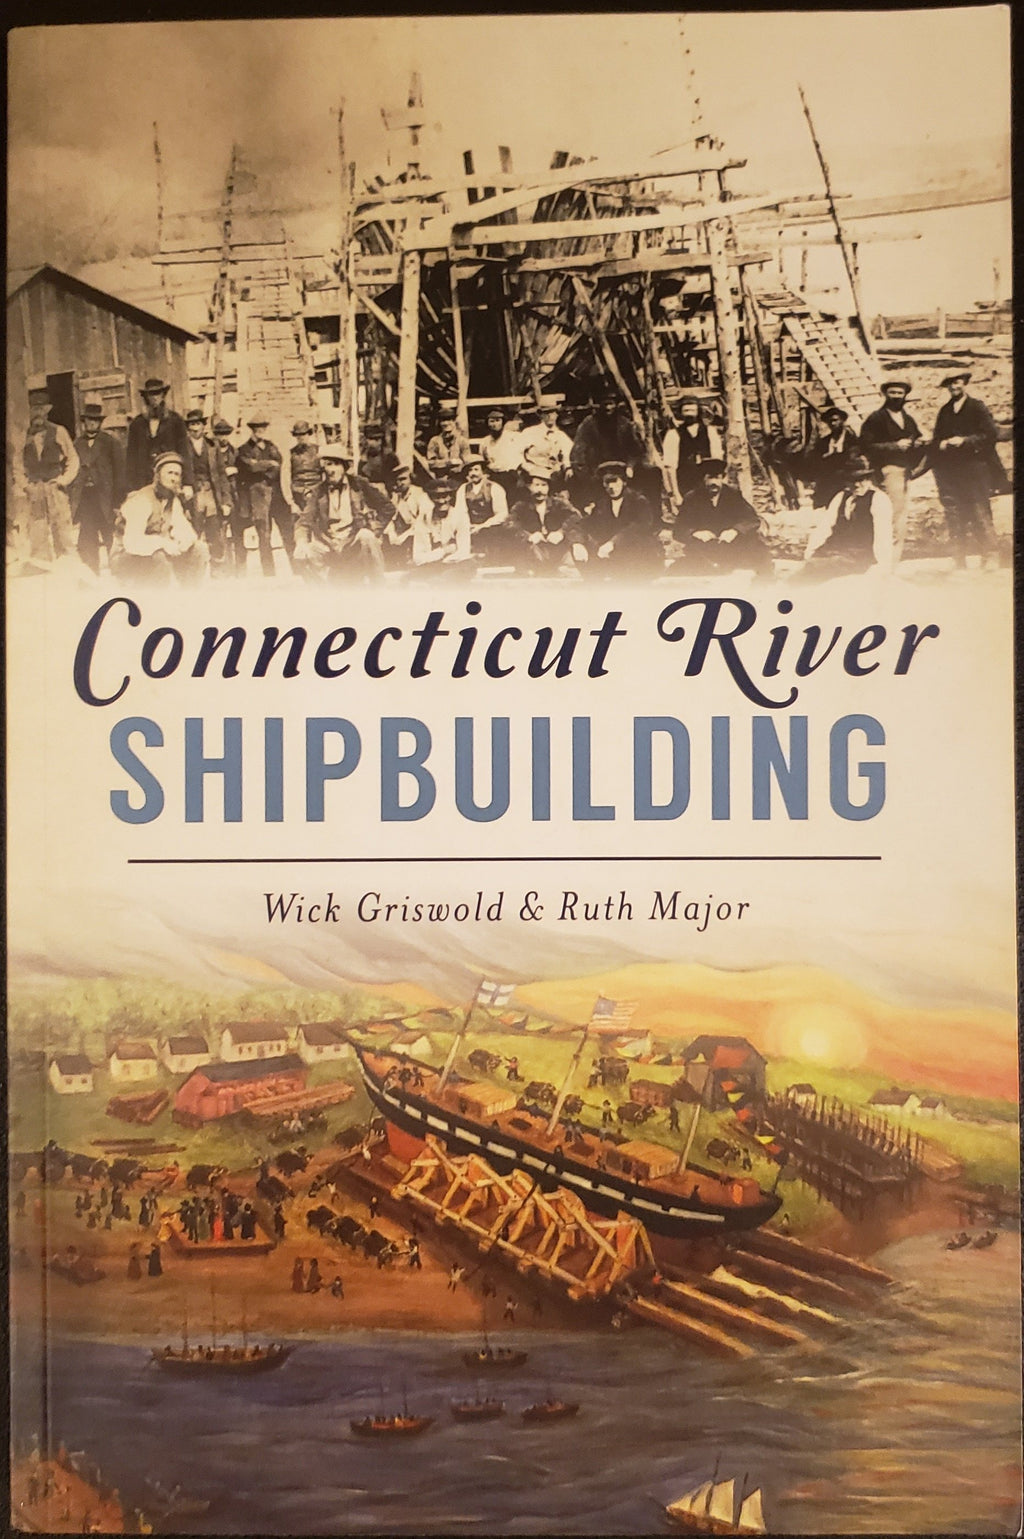 Connecticut River Shipbuilding by Wick Griswold & Ruth Major